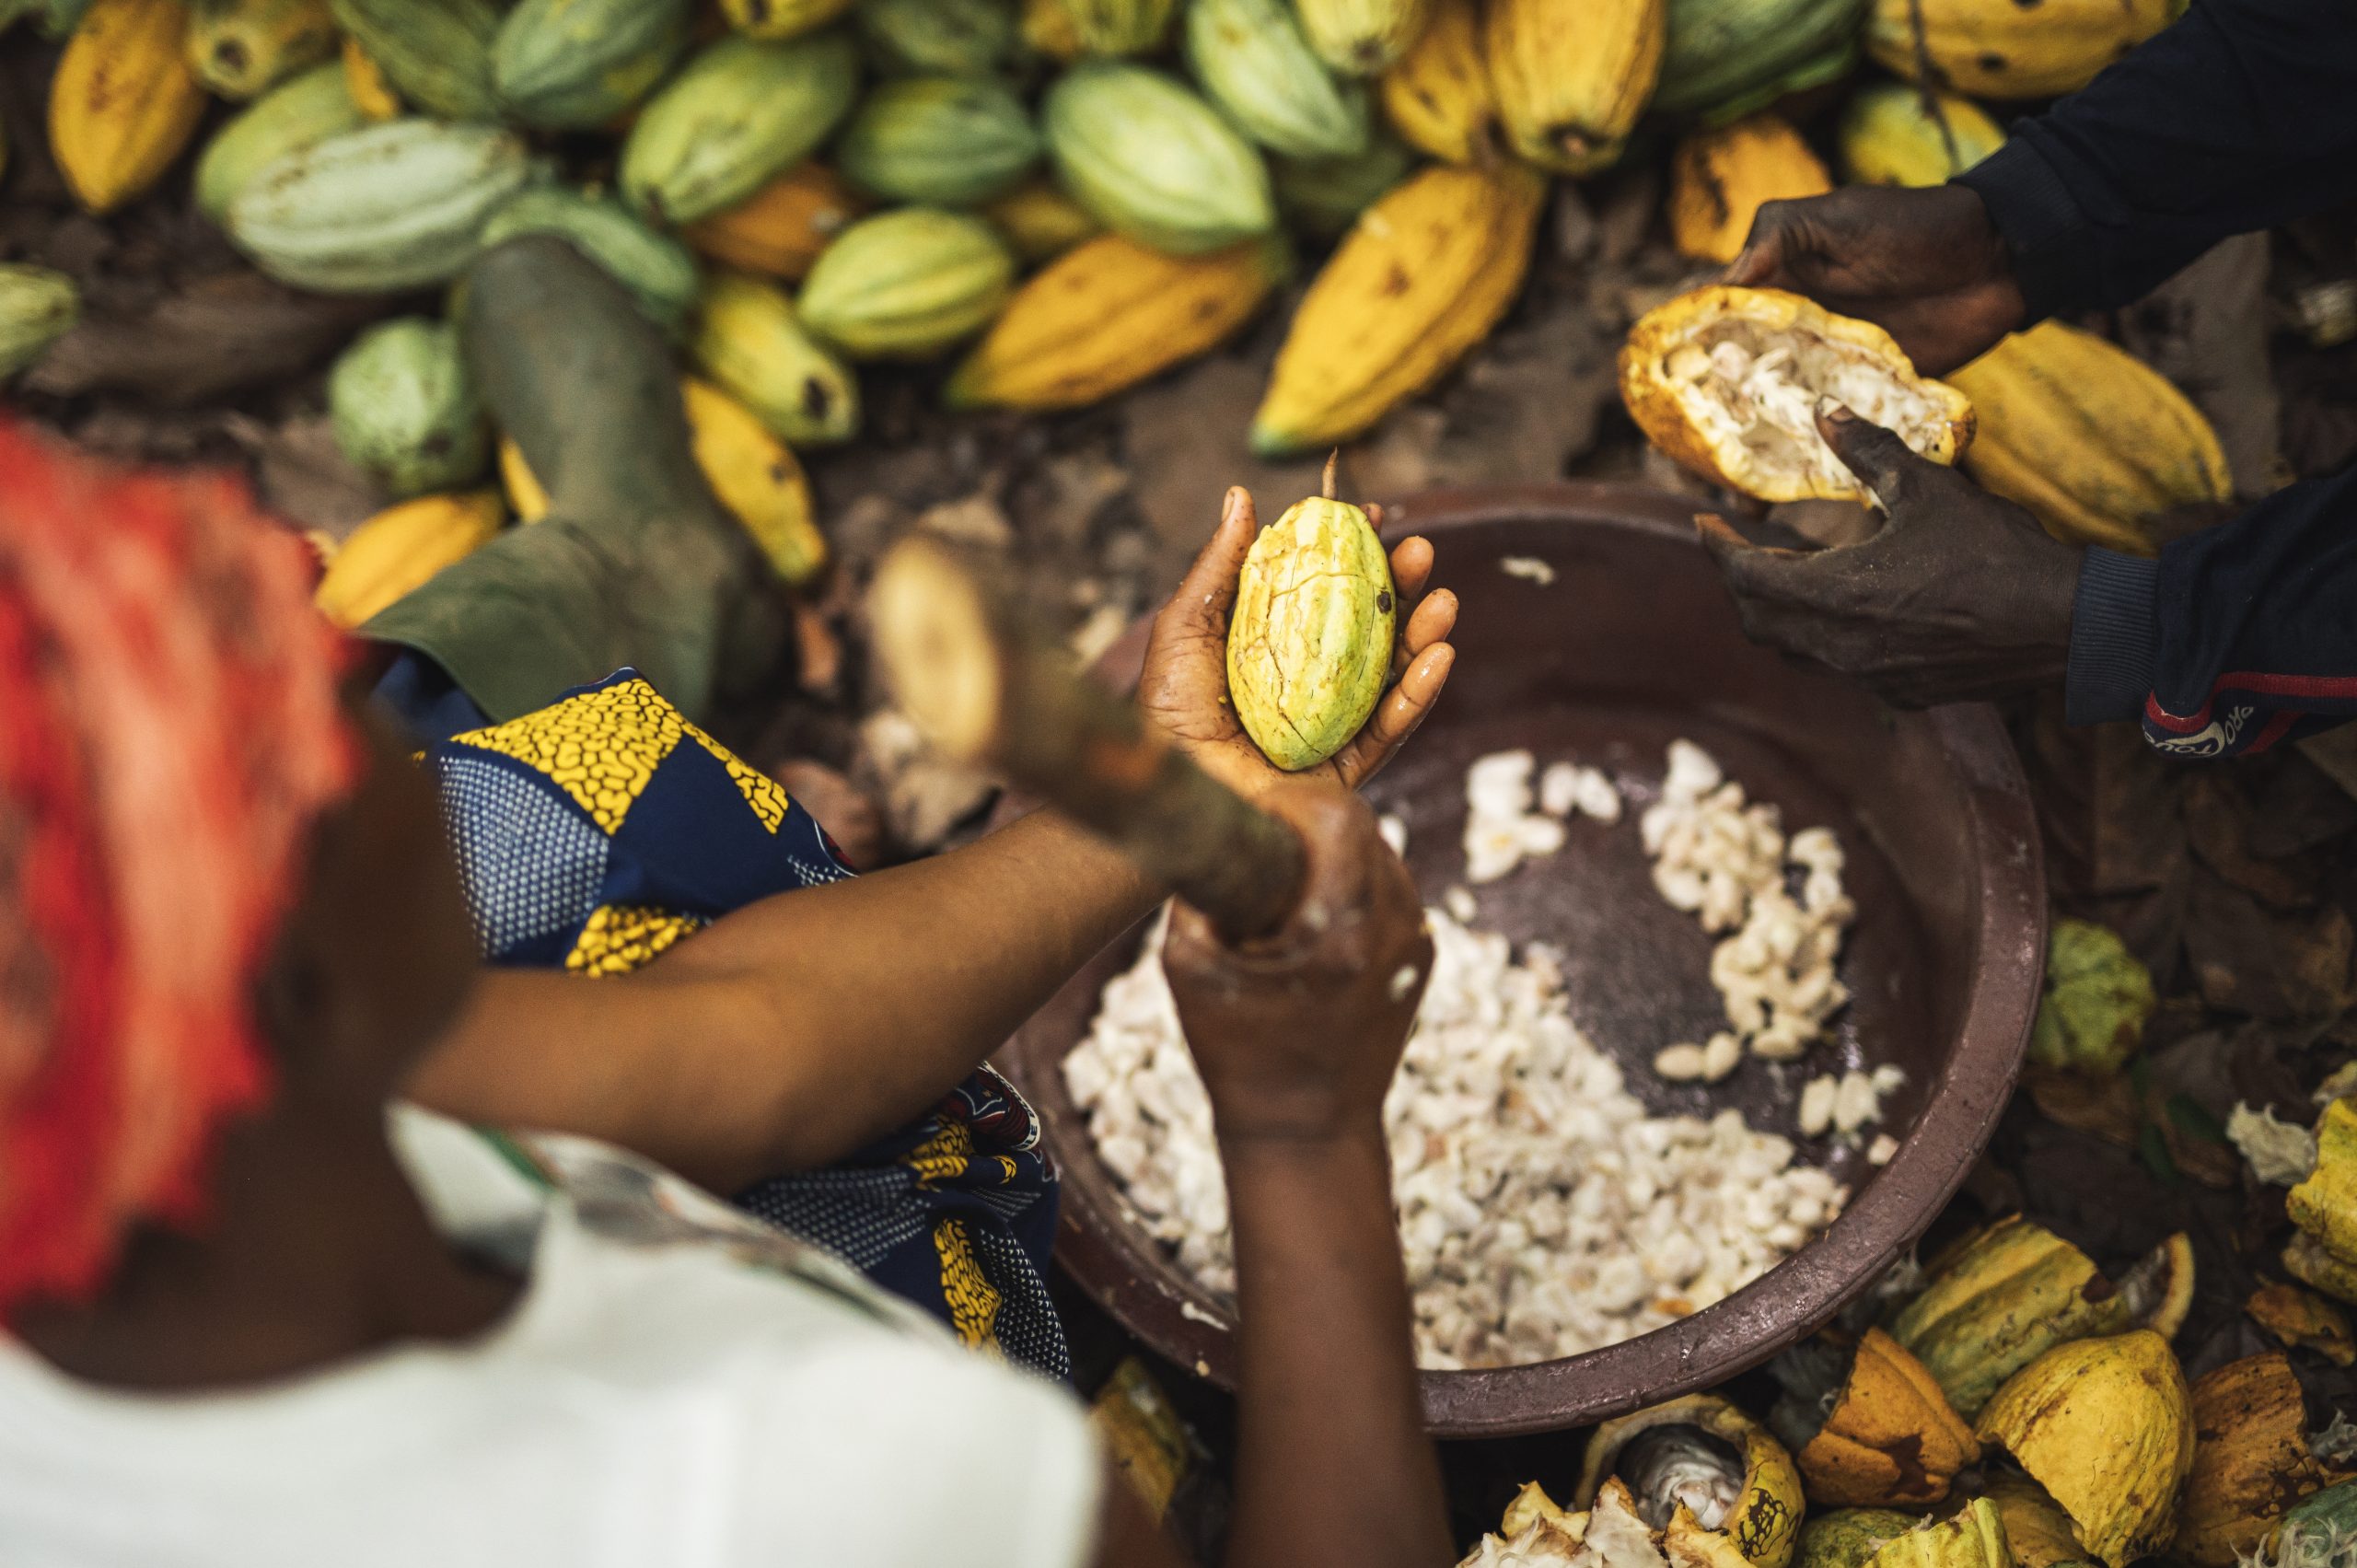 About Fairtrade Africa